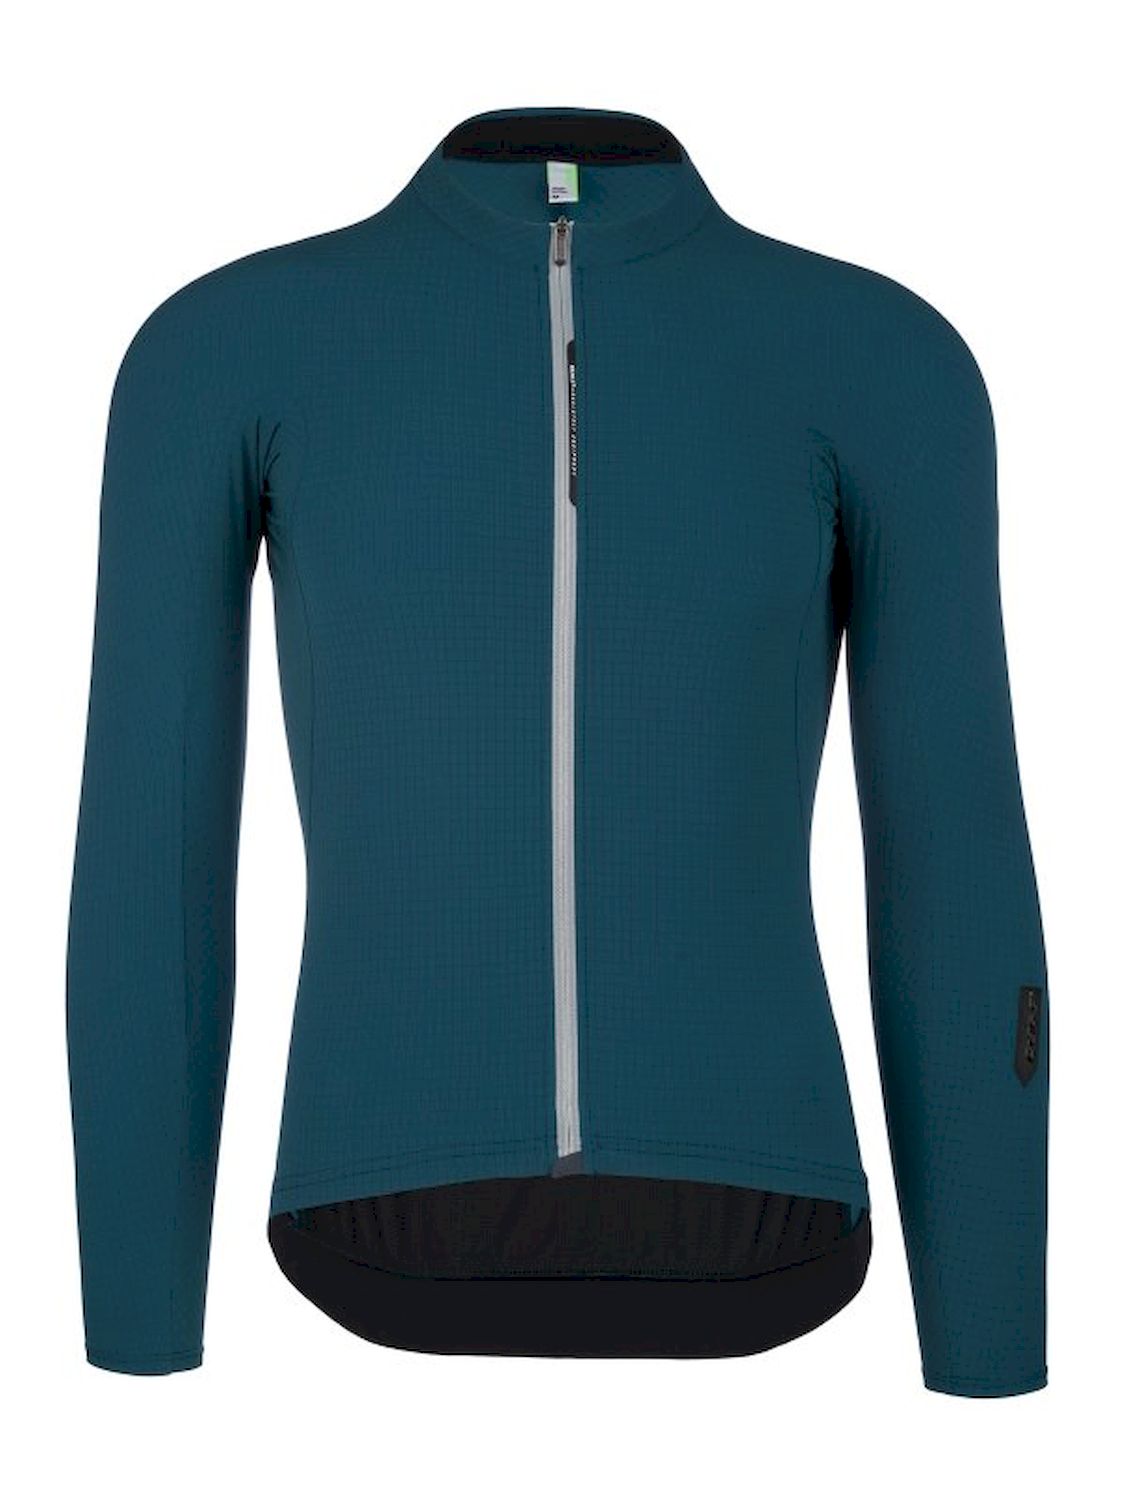 Q36.5 Jersey Long Sleeve L1 Pinstripe X - Maillot vélo homme